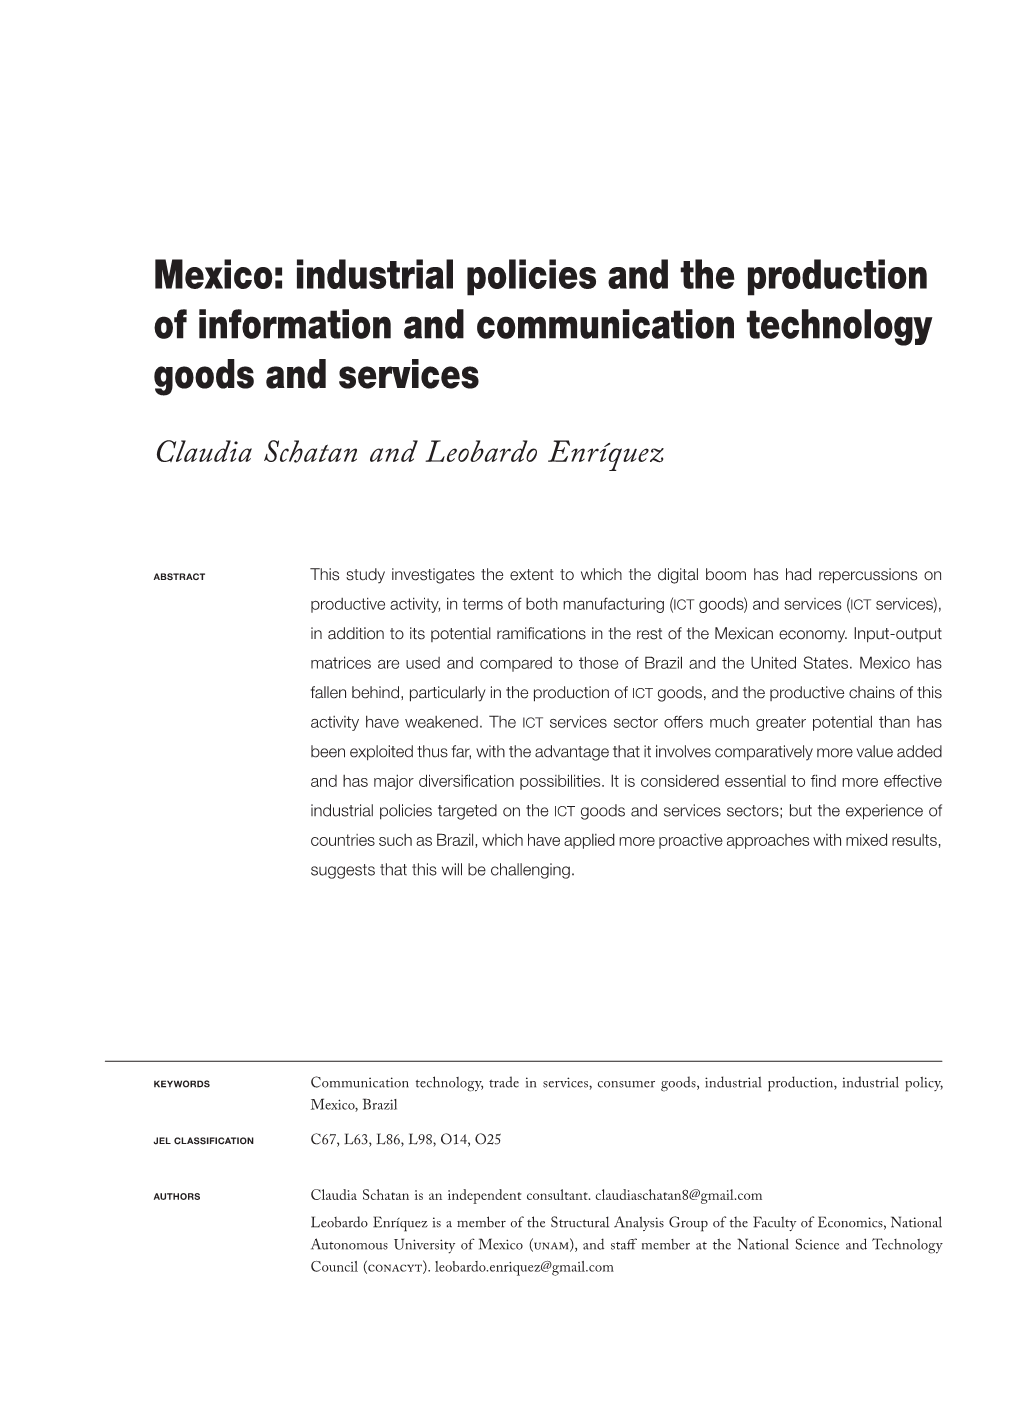 Mexico: Industrial Policies and the Production of Information and Communication Technology Goods and Services